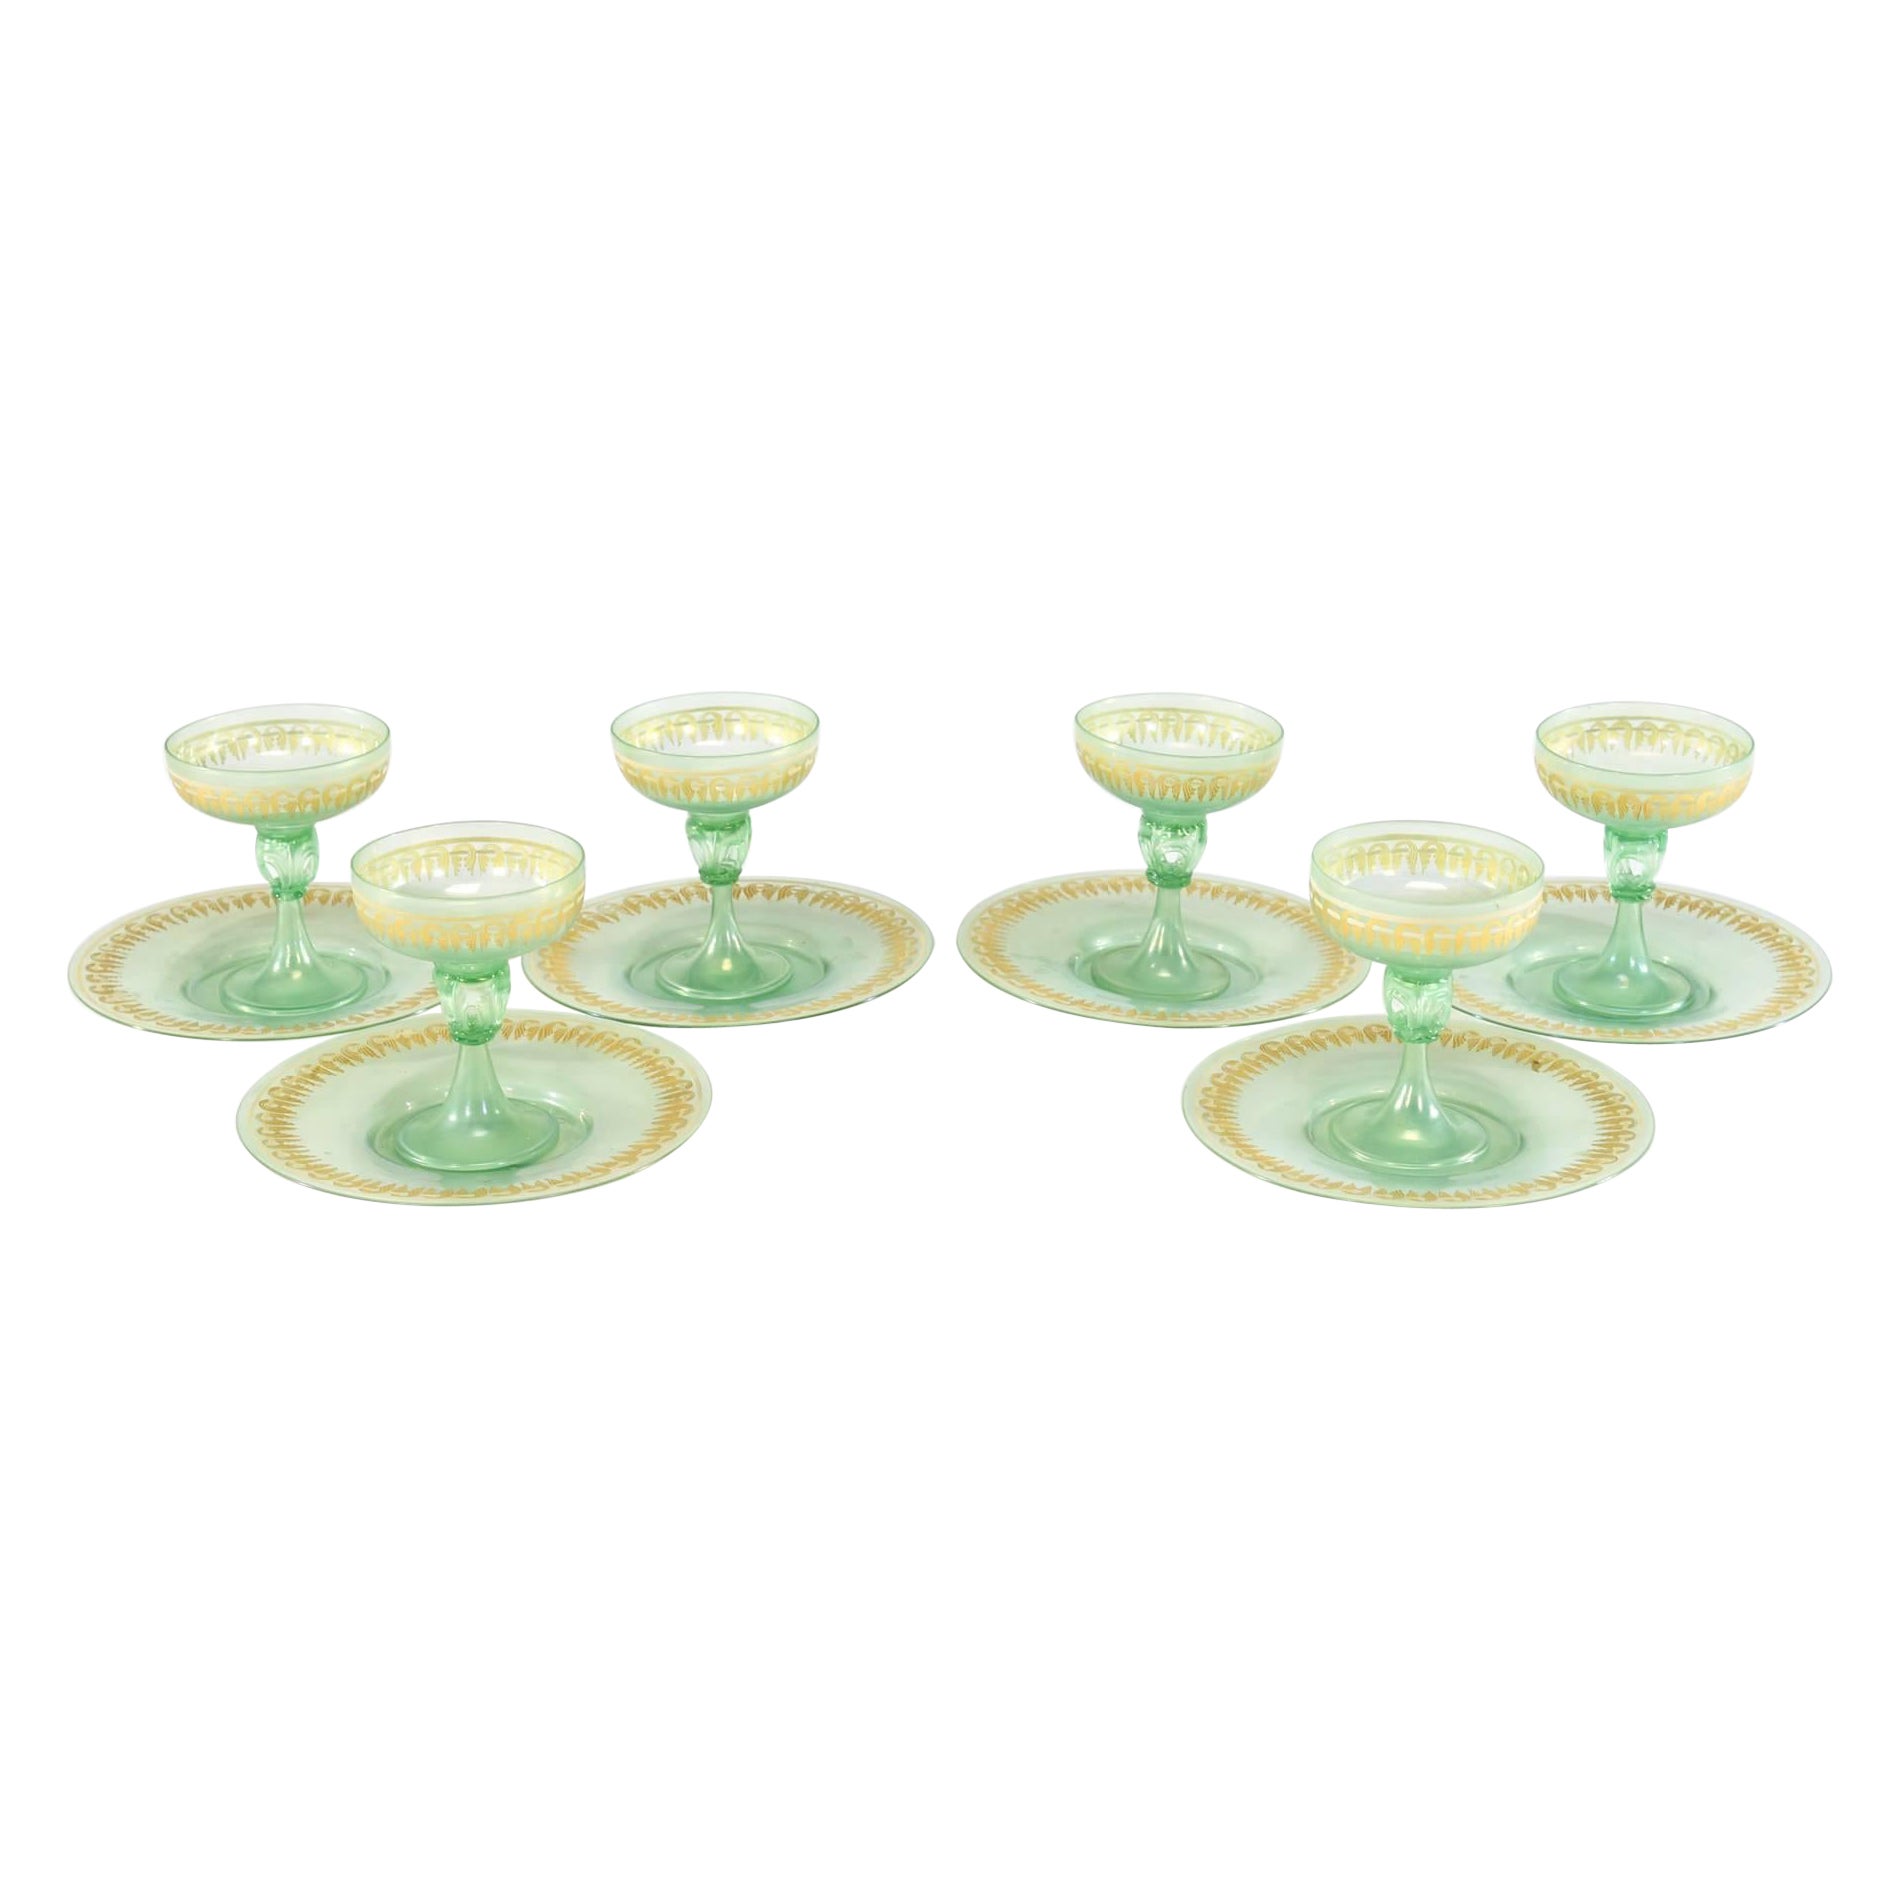 6 Iridescent Green Gold Enamel Venetian Footed Dessert Coupes & Underplates For Sale